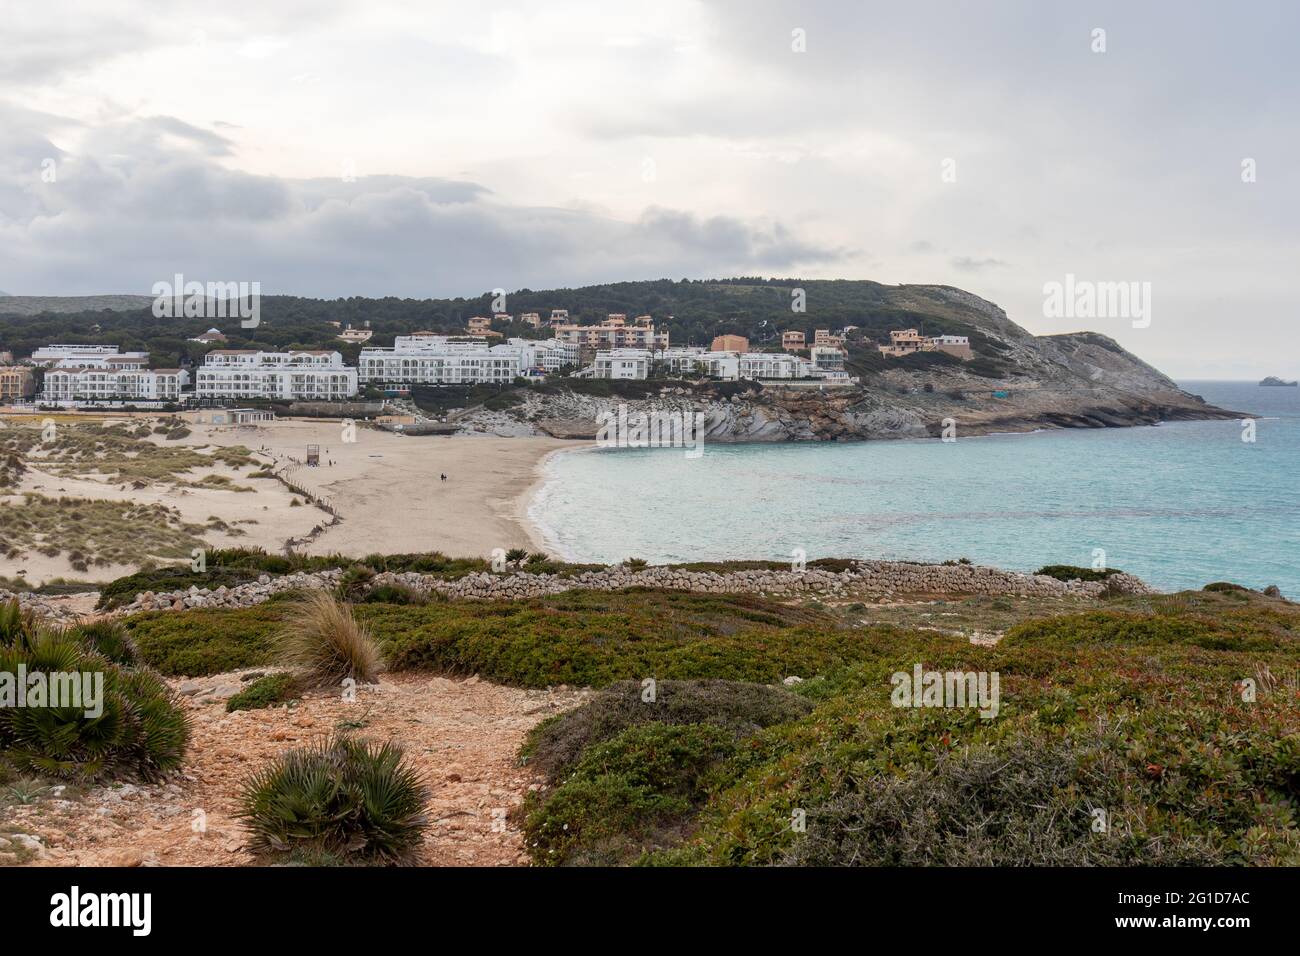 Cala Mesquida beach in Mallorca, Spain. Wild beach with dunes and hotels on a stormy day Stock Photo